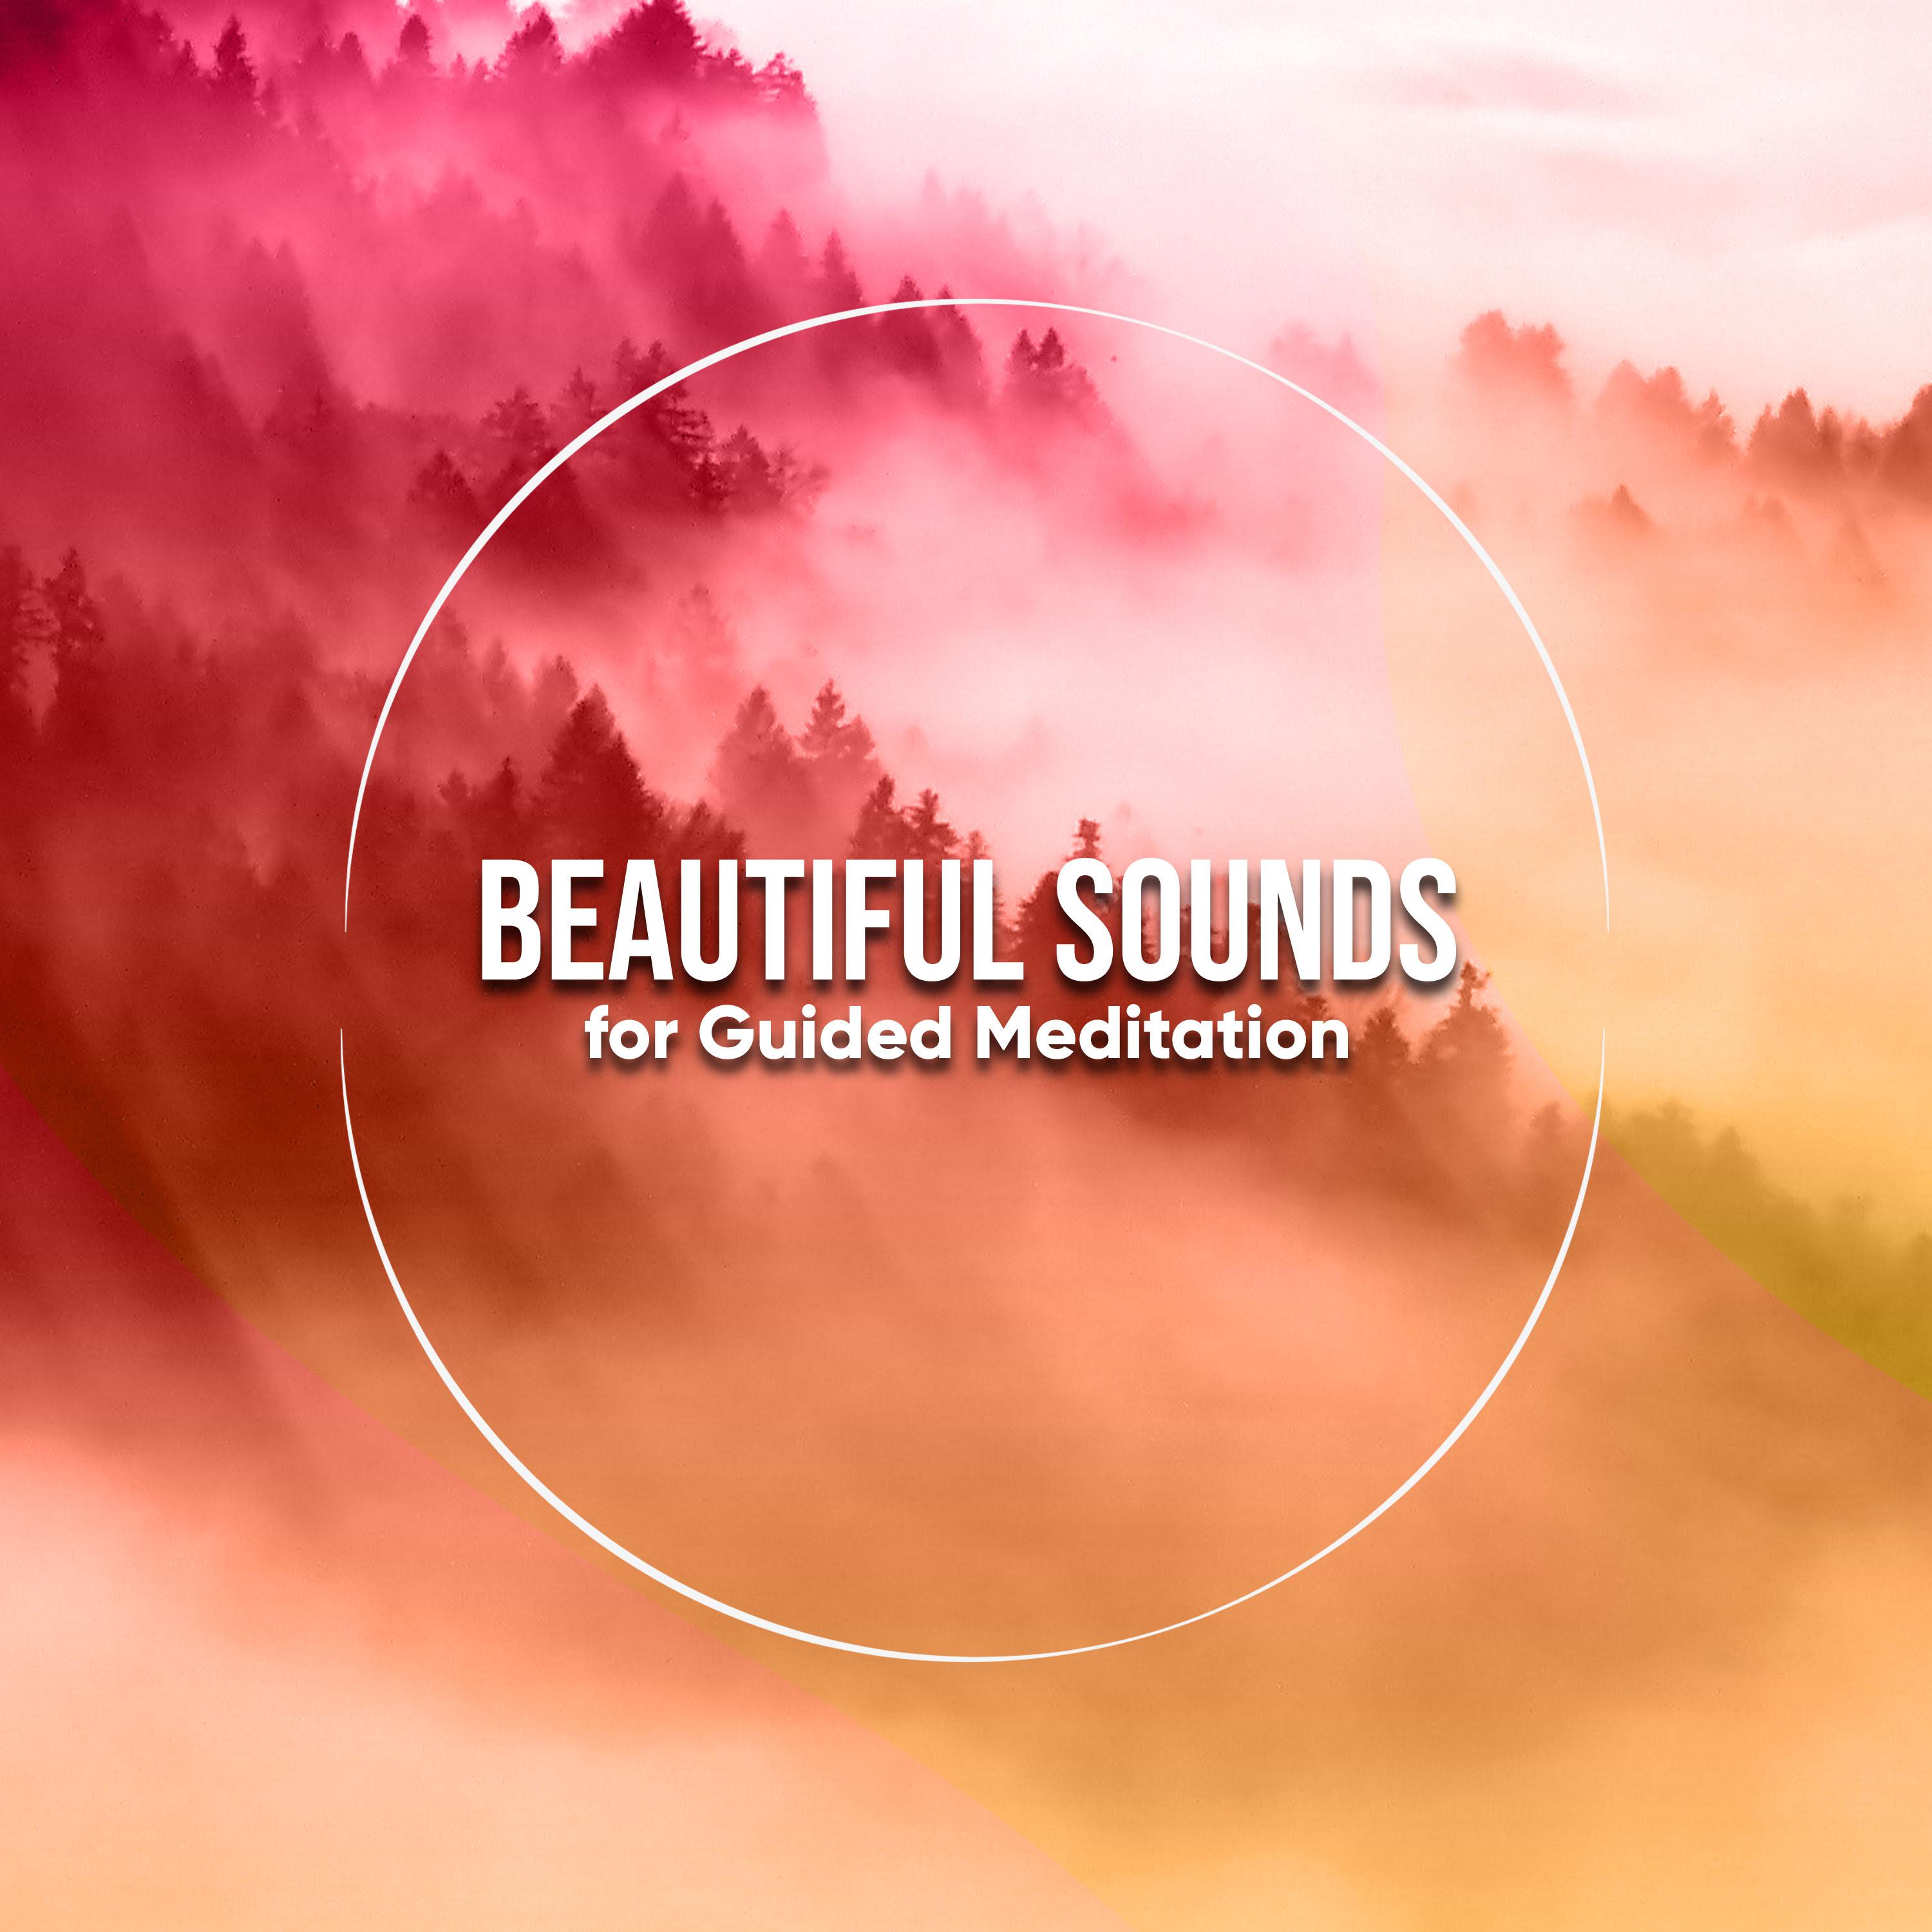 18 Beautiful Sounds for Guided Meditation